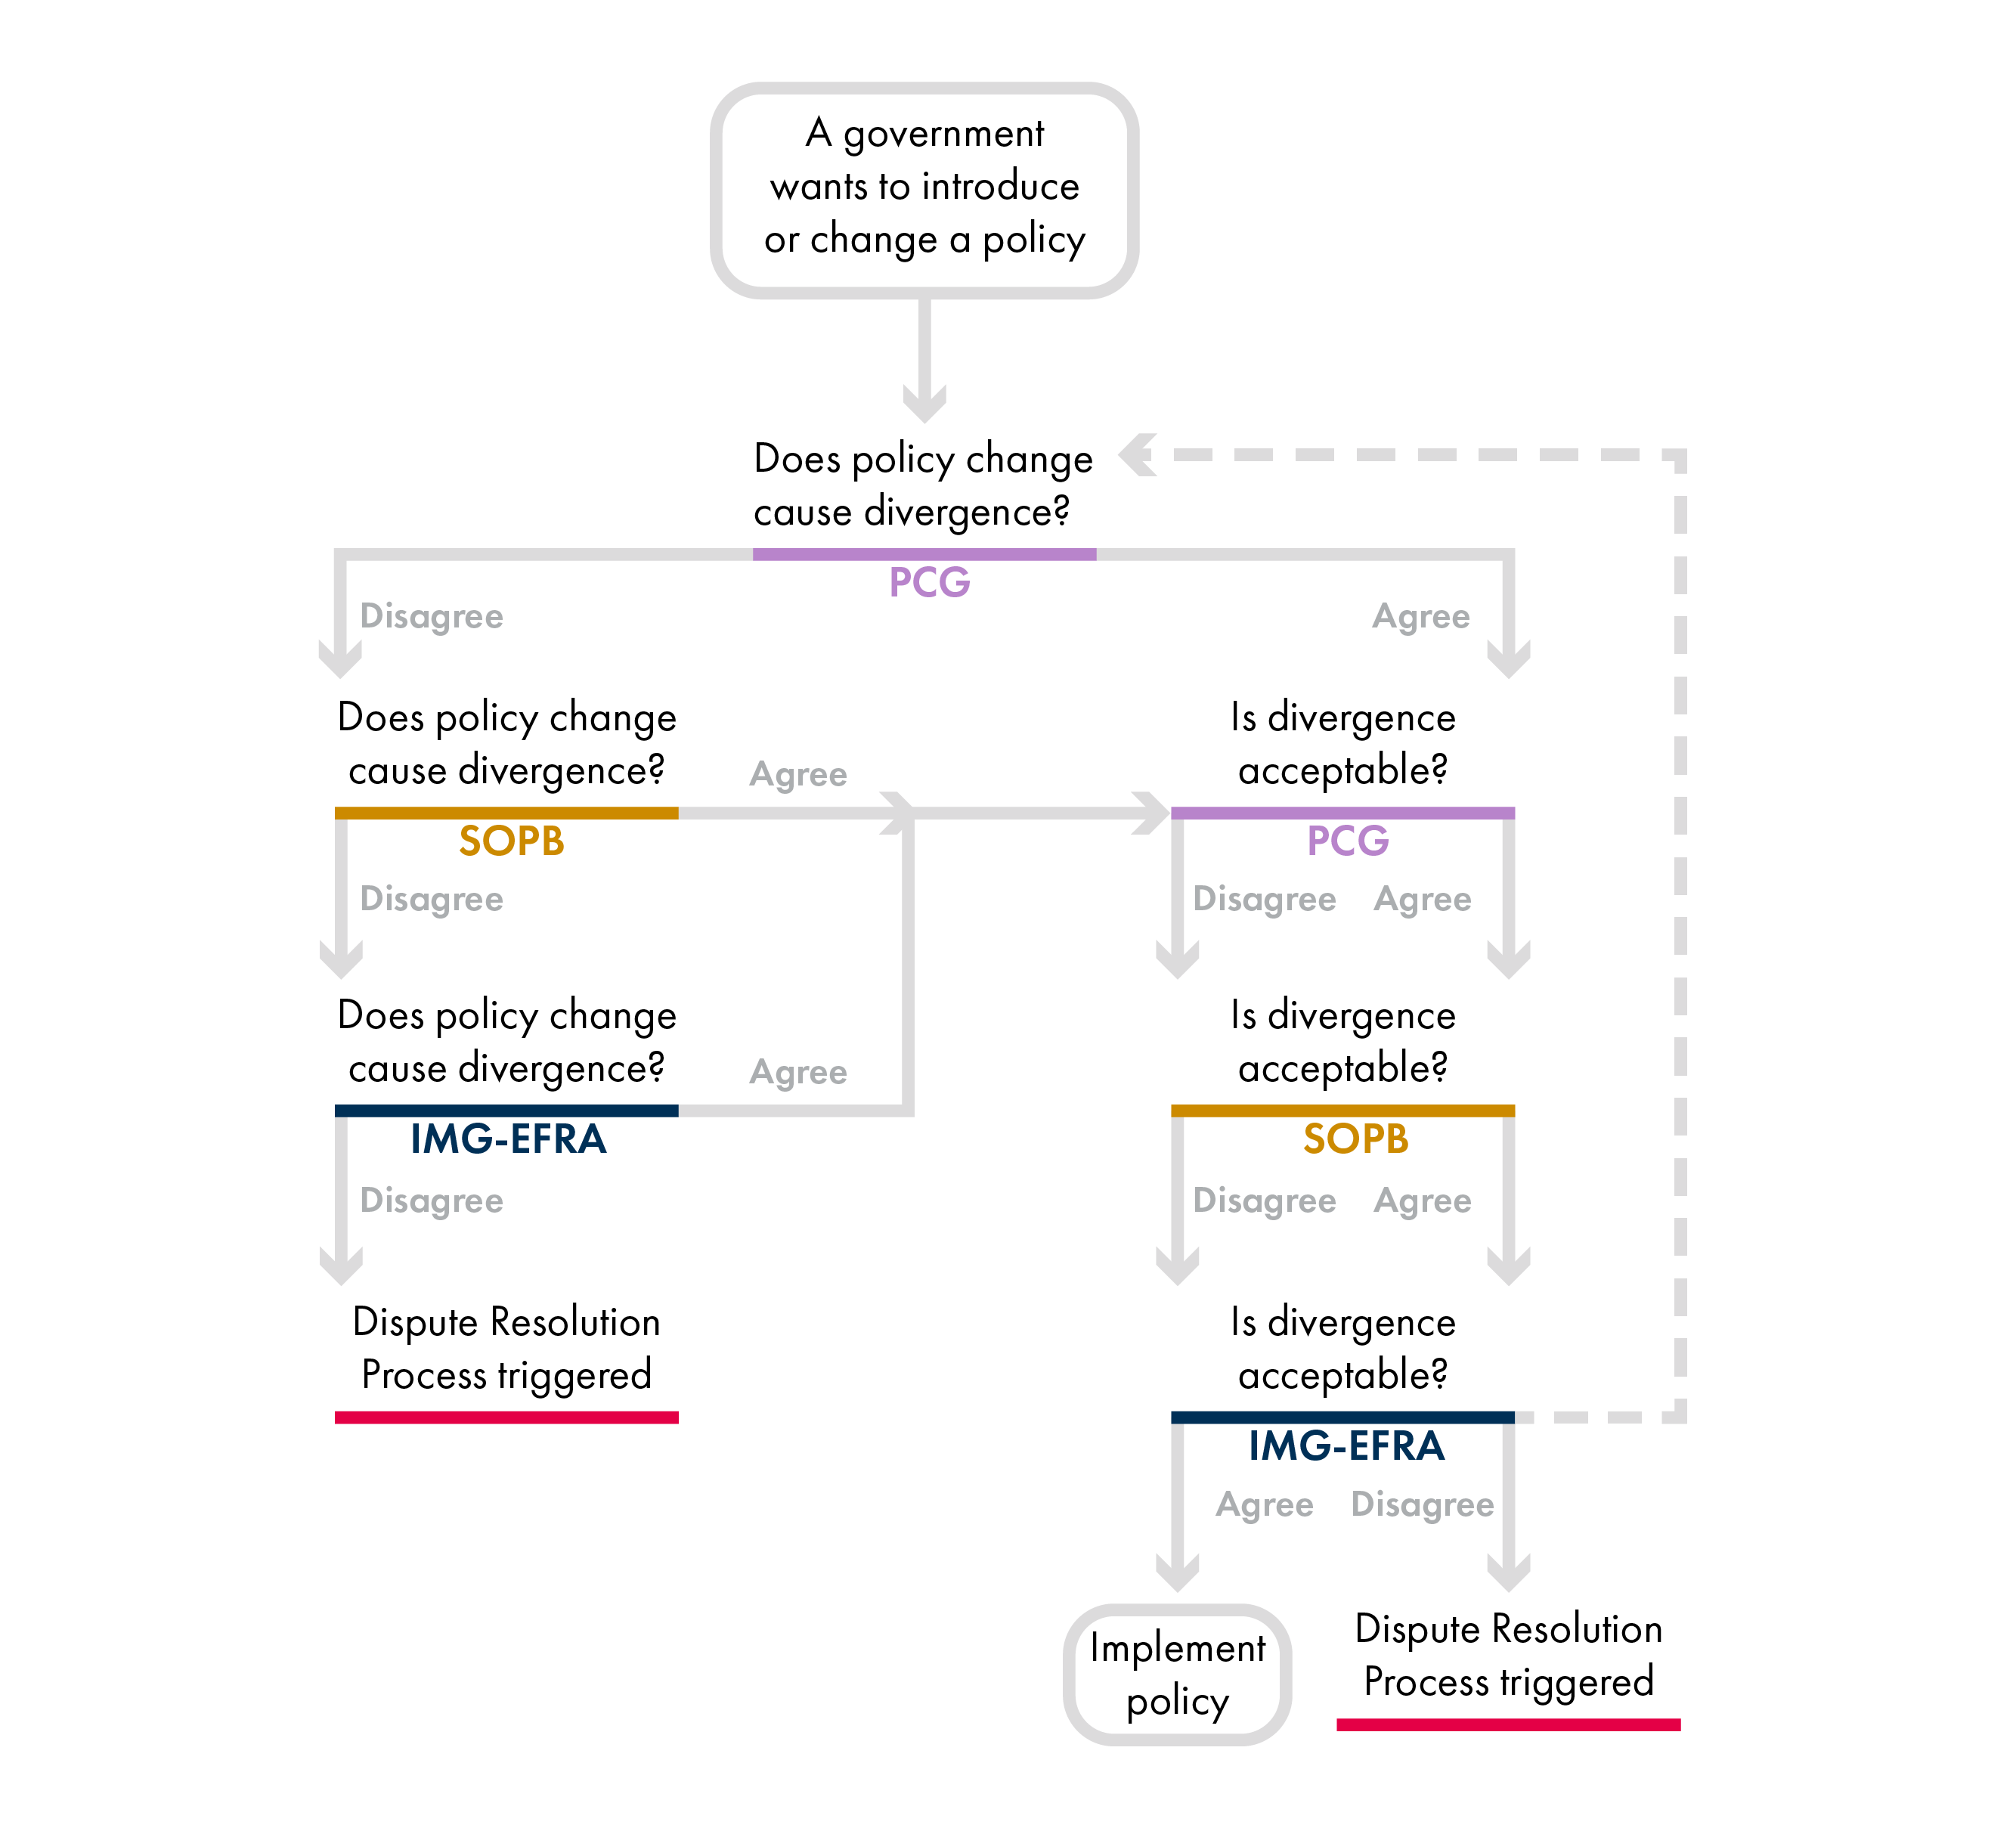 The flow diagram shows the levels at which policy proposals put forward by a government are considered and the core questions considered at each level. The briefing text explains the process fully.